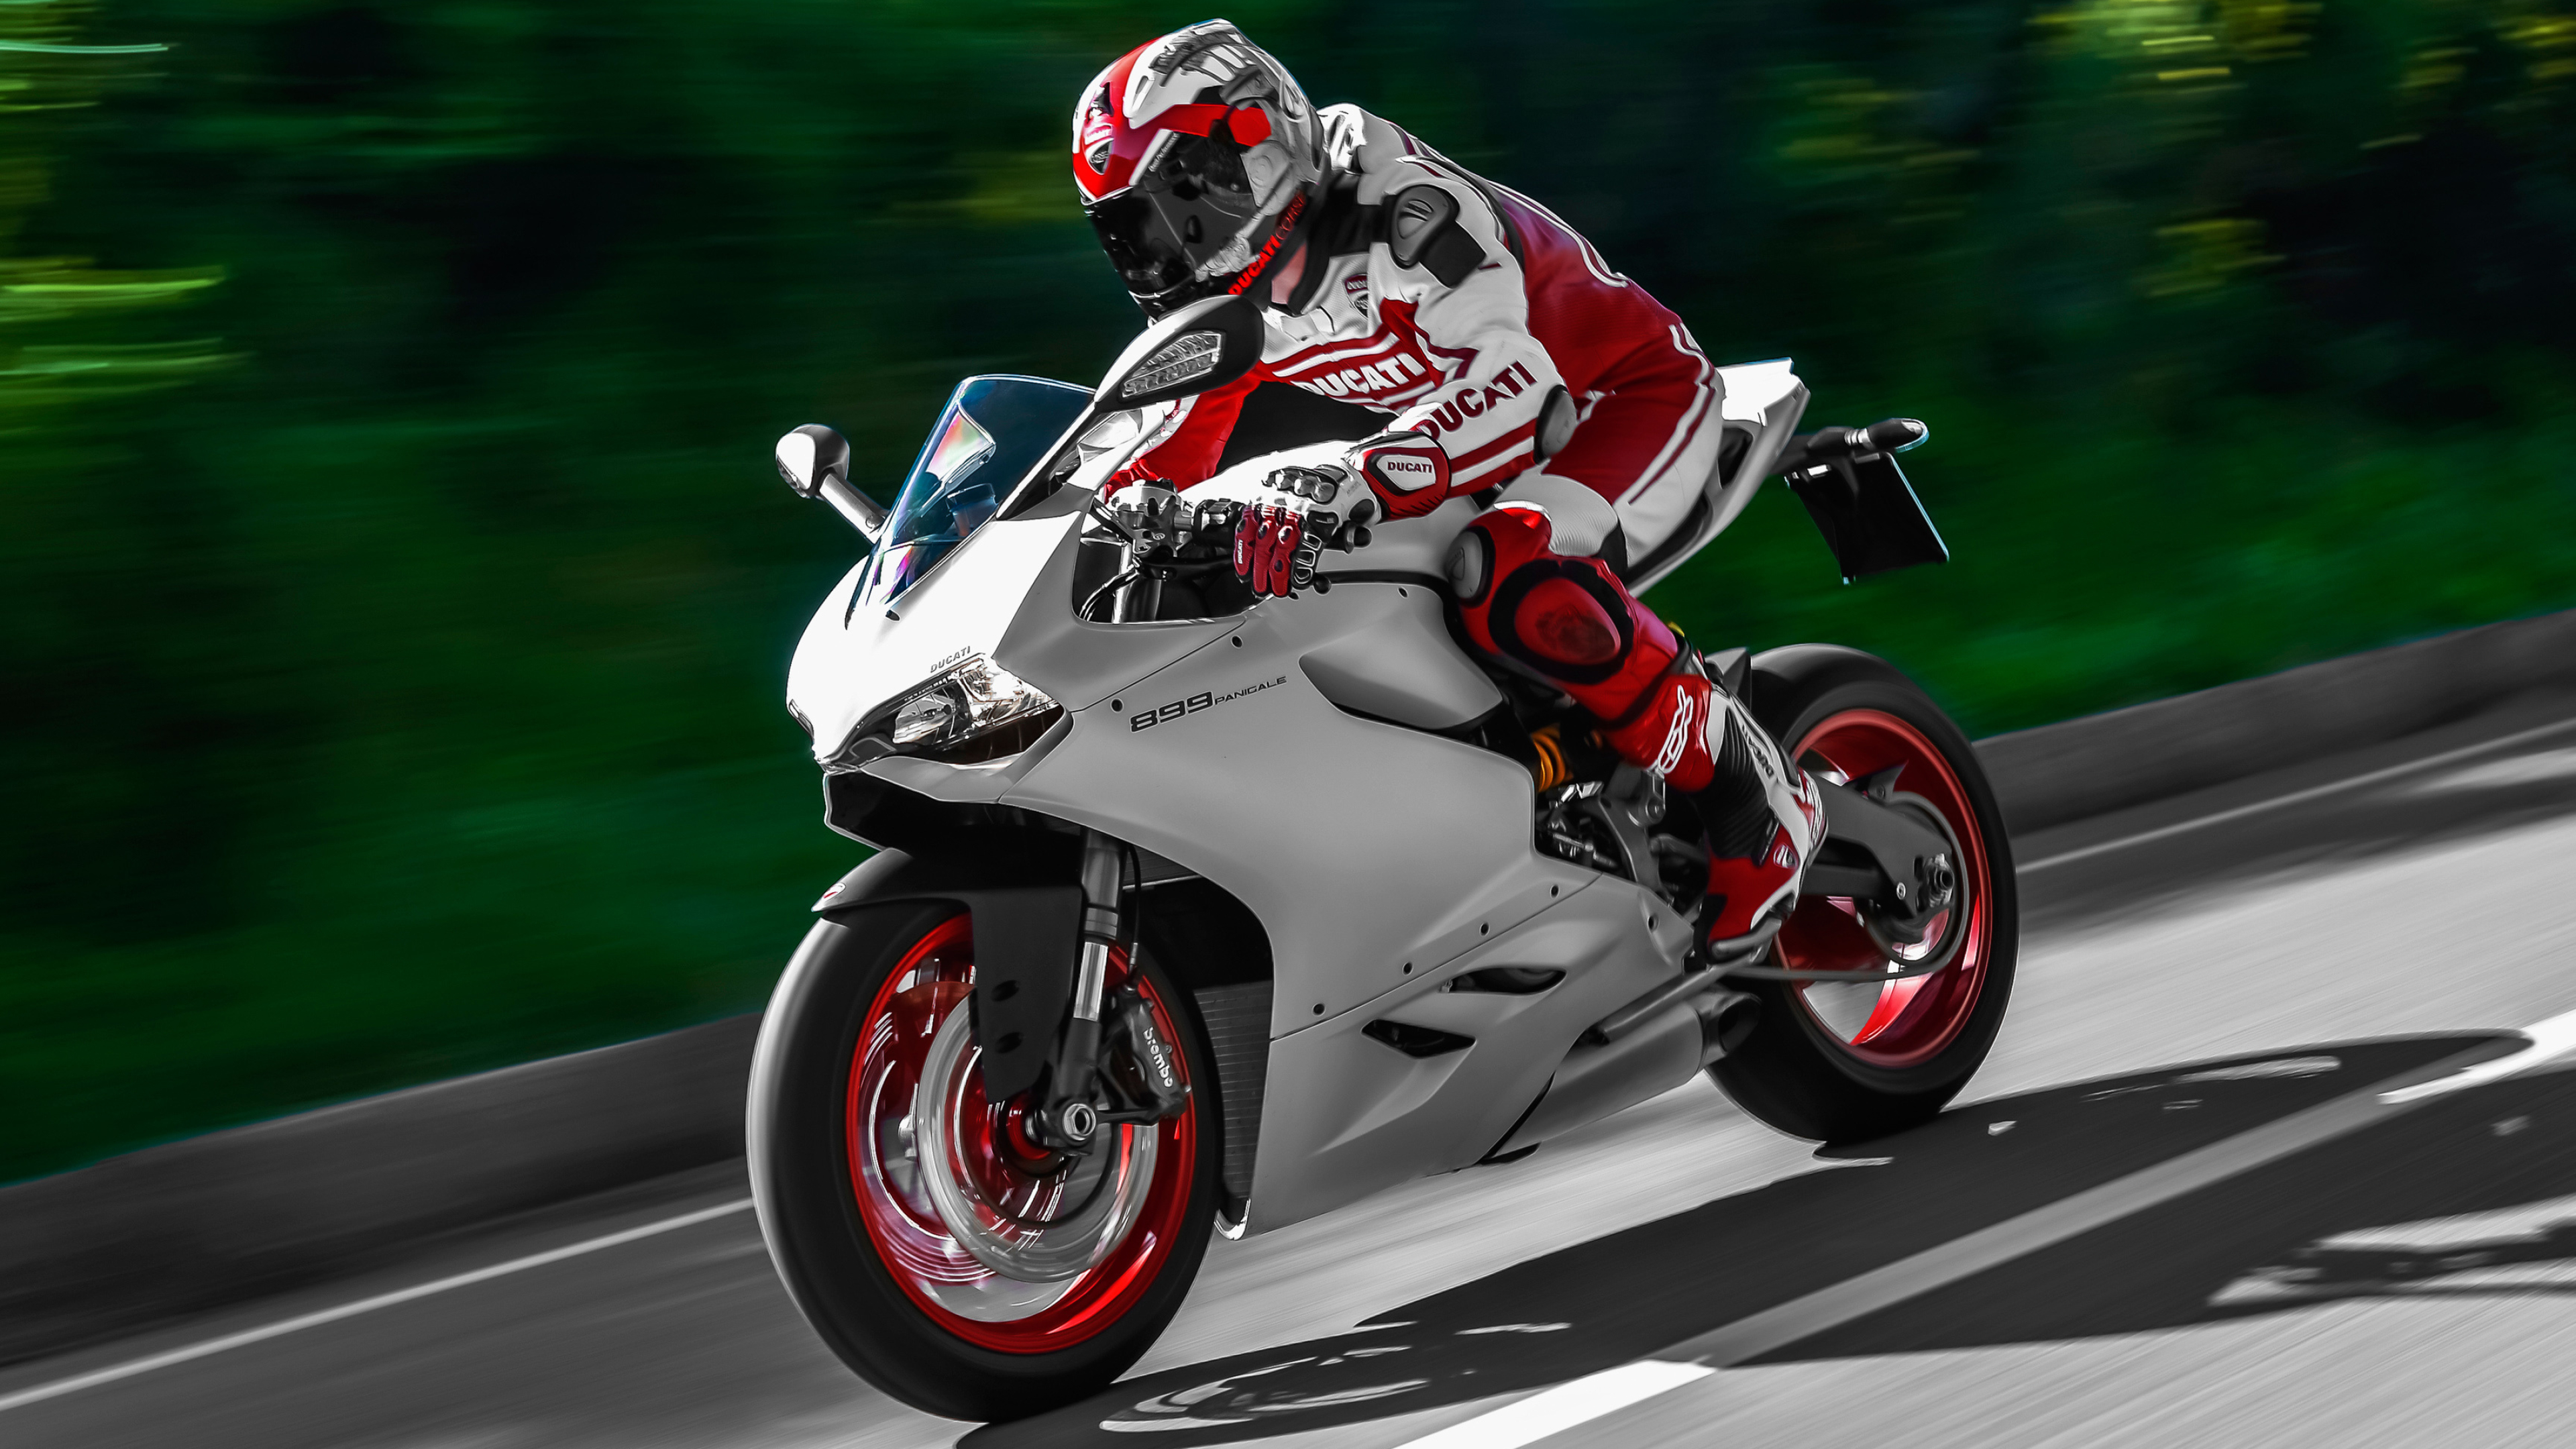 Superbike: The Ducati 899 Panigale, A 148-horsepower sports motorcycle, A racing transport. 3840x2160 4K Wallpaper.